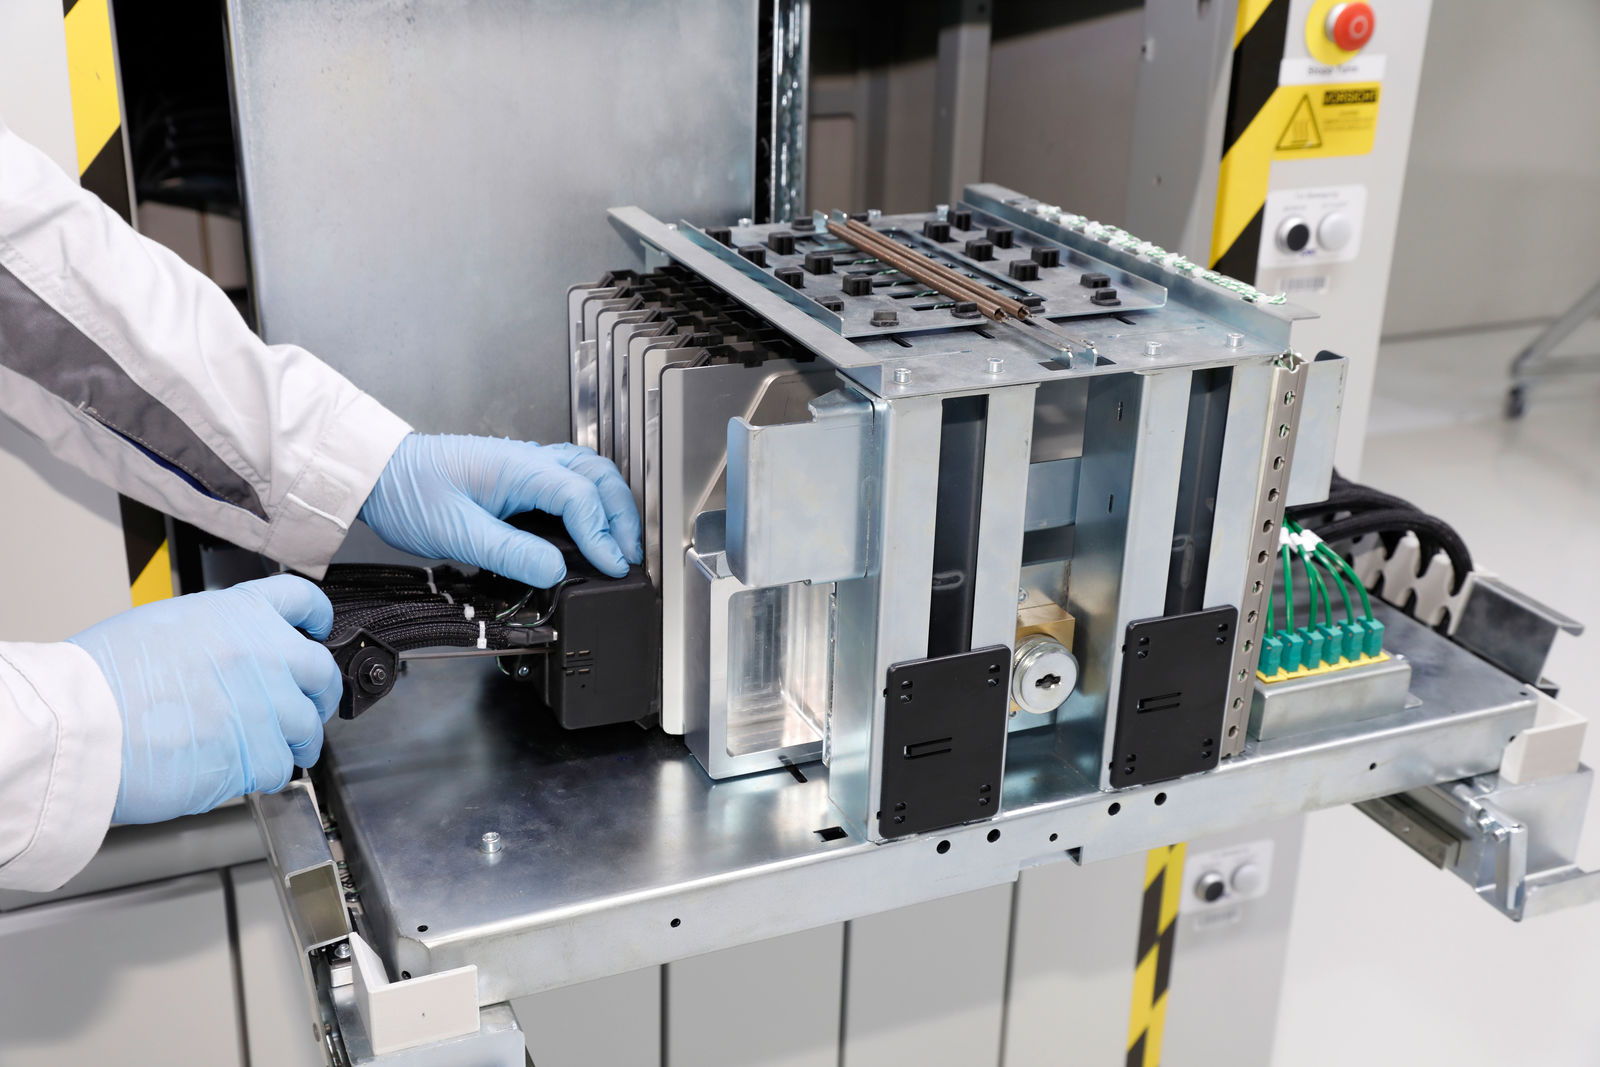 Volkswagen Group starts battery cell development and production in Salzgitter